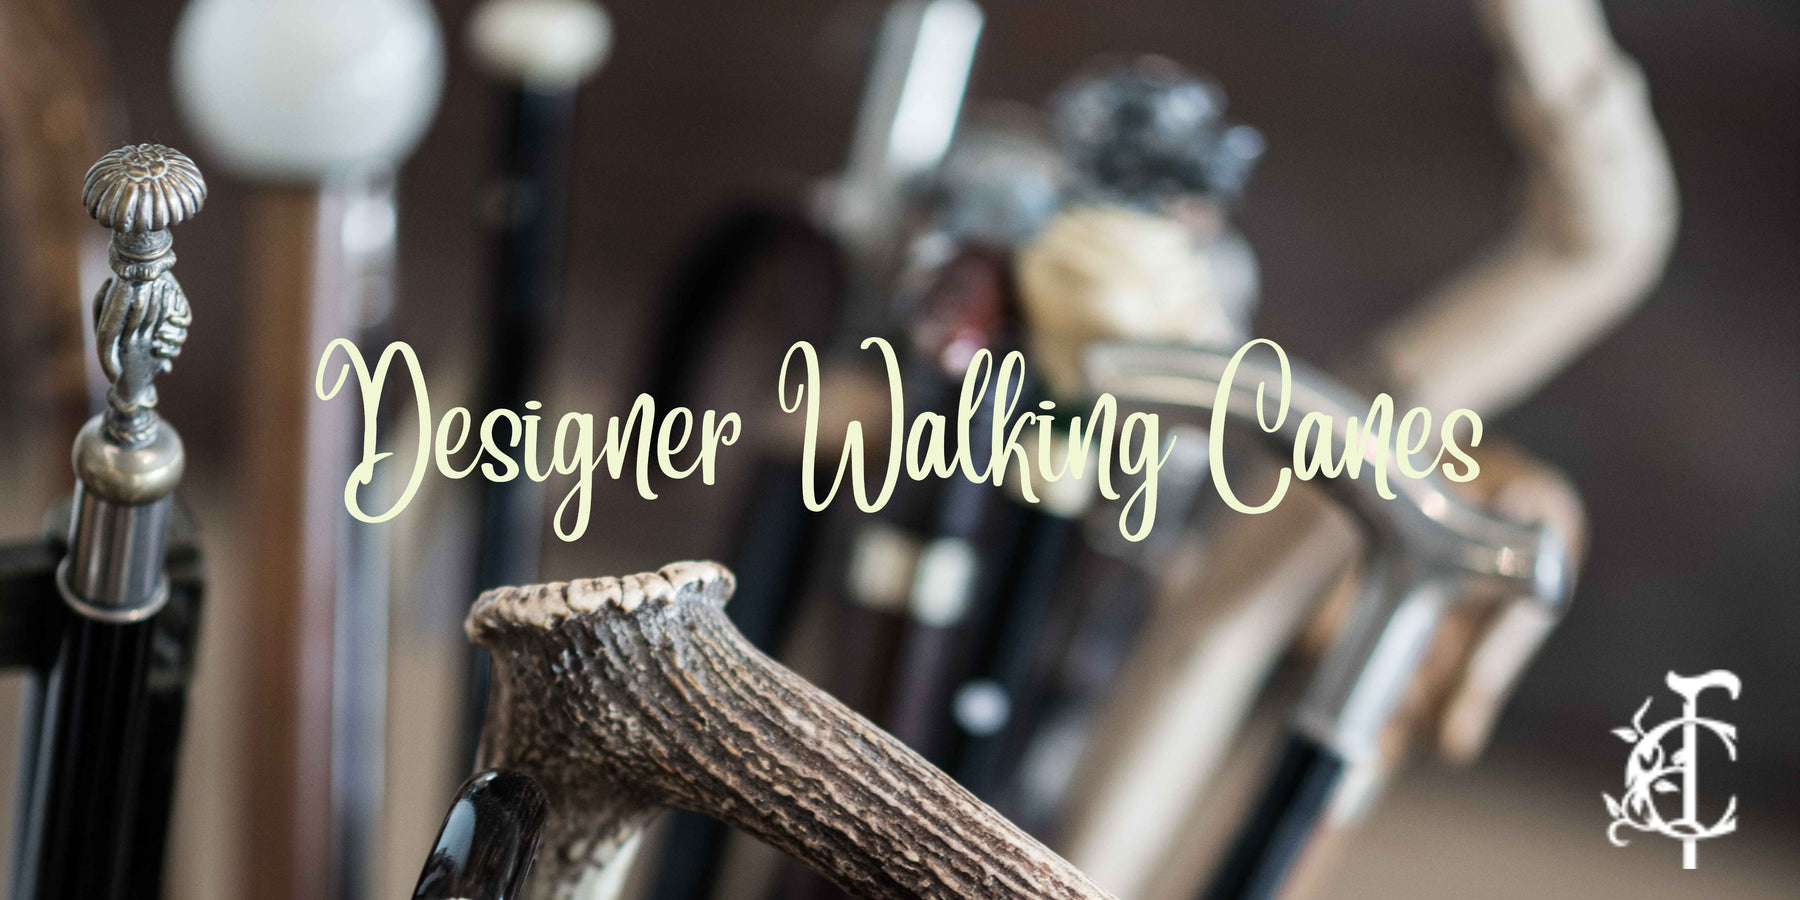 Why We Need to Use Walking Canes?